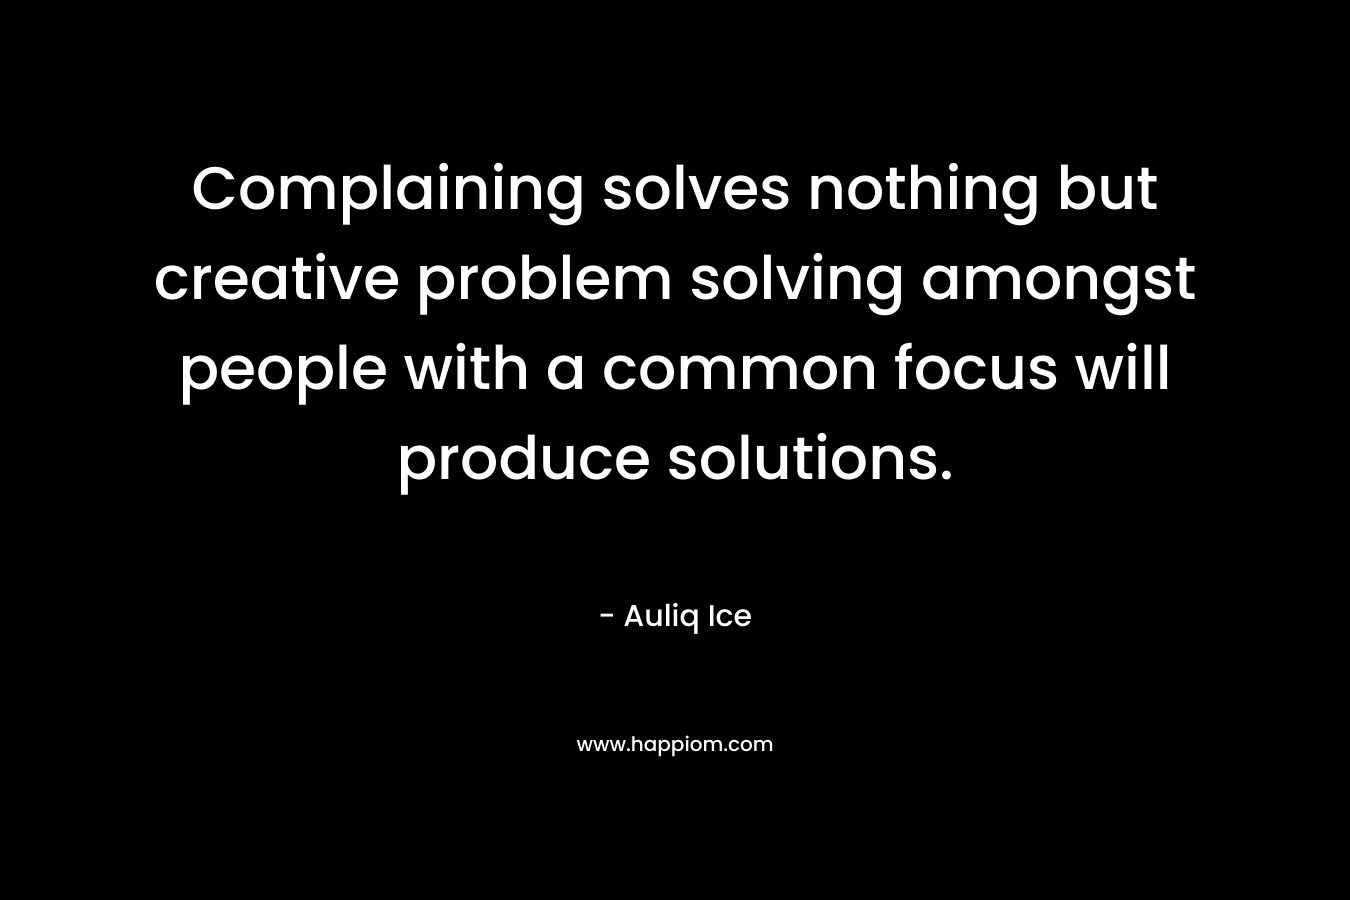 Complaining solves nothing but creative problem solving amongst people with a common focus will produce solutions.